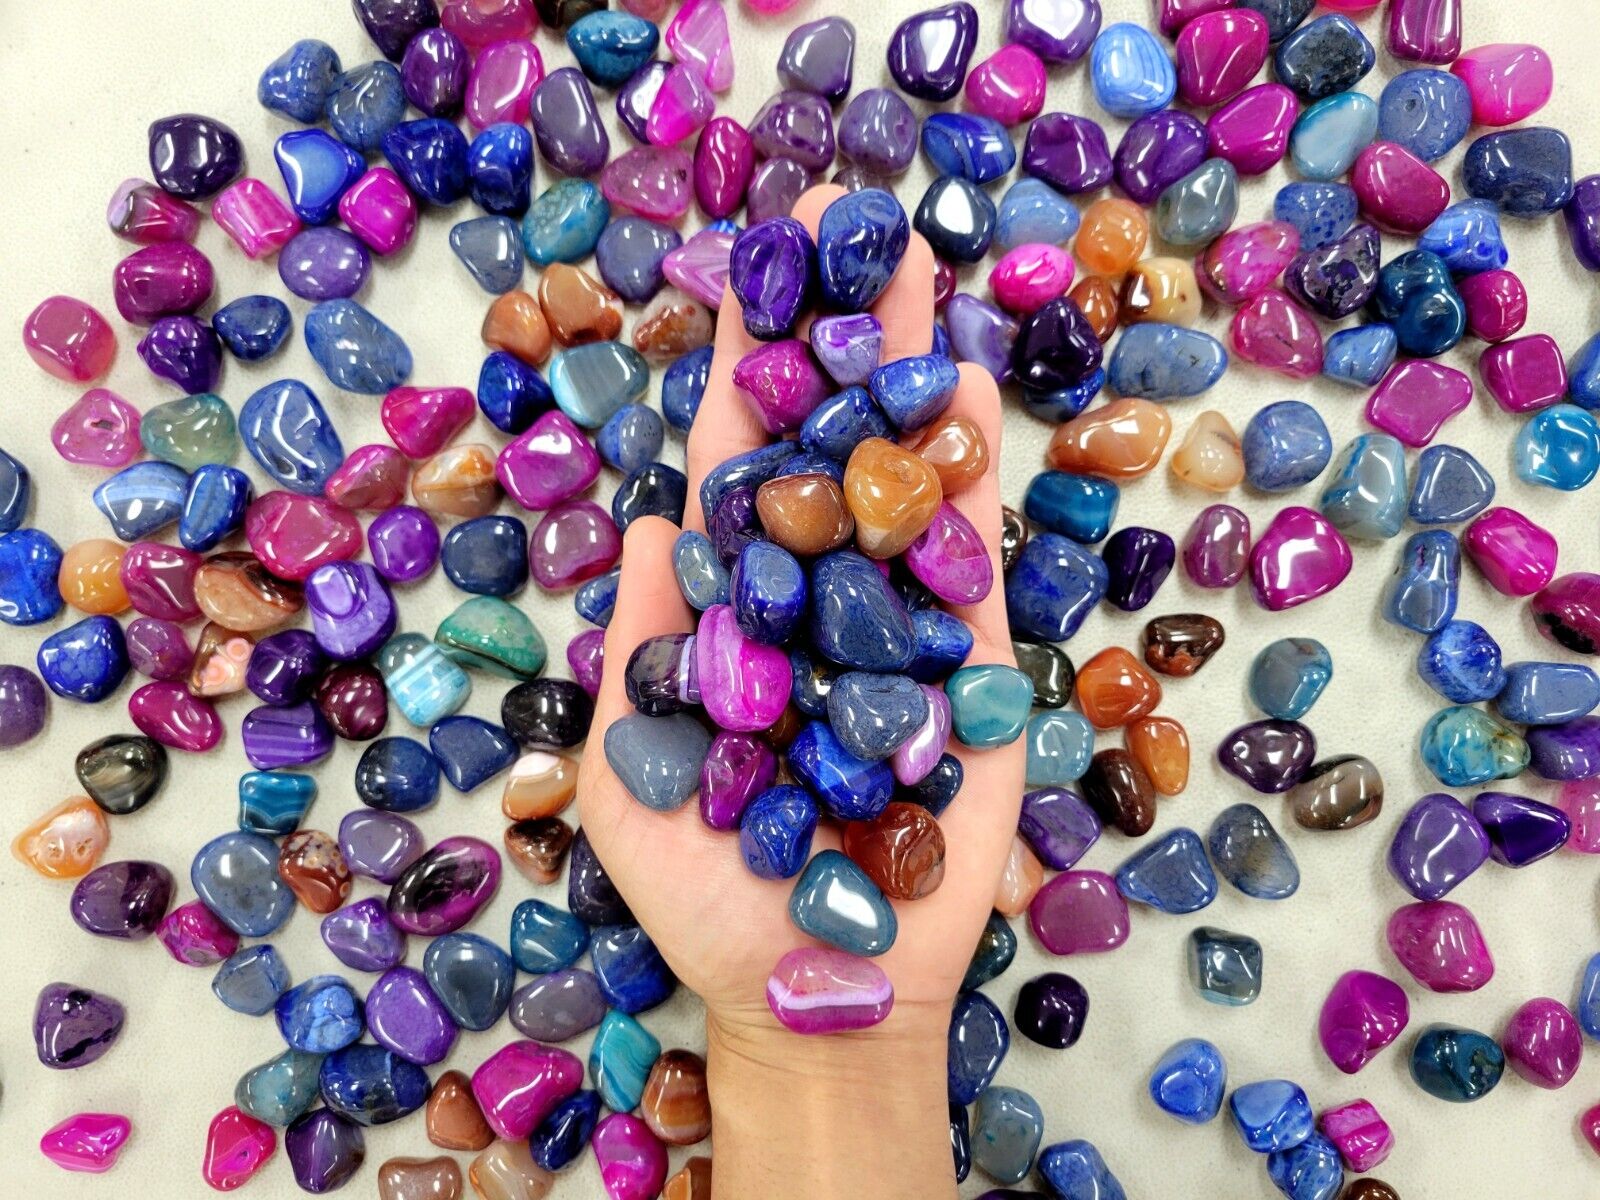 Dyed Agate Tumbled Crystals Bright Colorful Assorted Gemstone Mix for Crafting